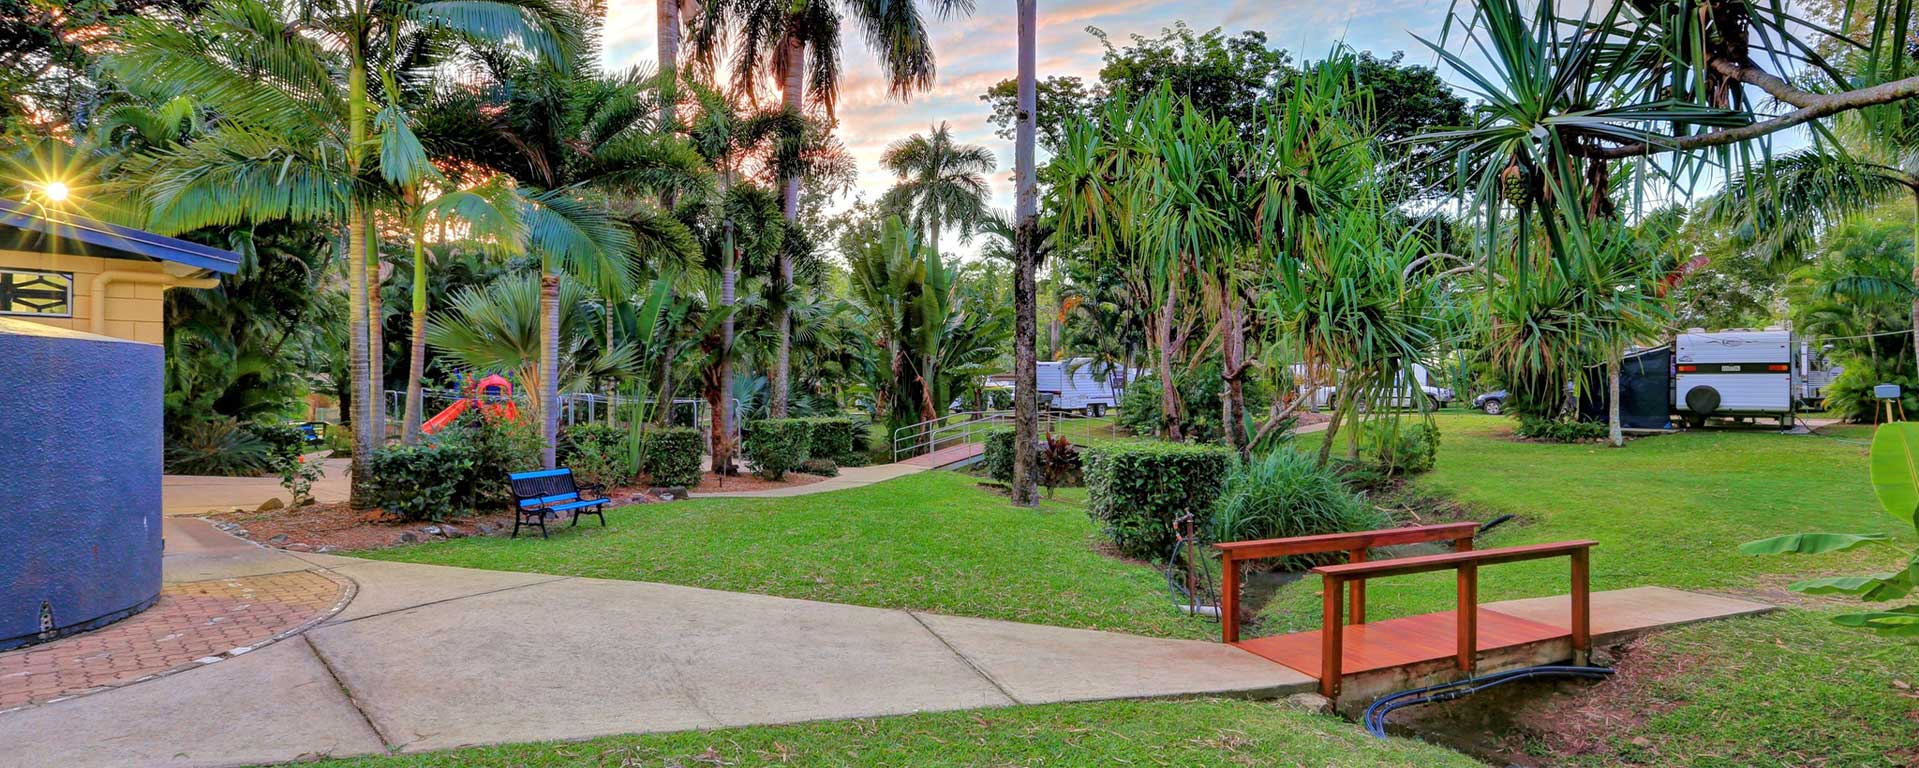 BIG4 Whitsundays Tropical Eco Resort is one of the pet friendly caravan parks in Airlie Beach